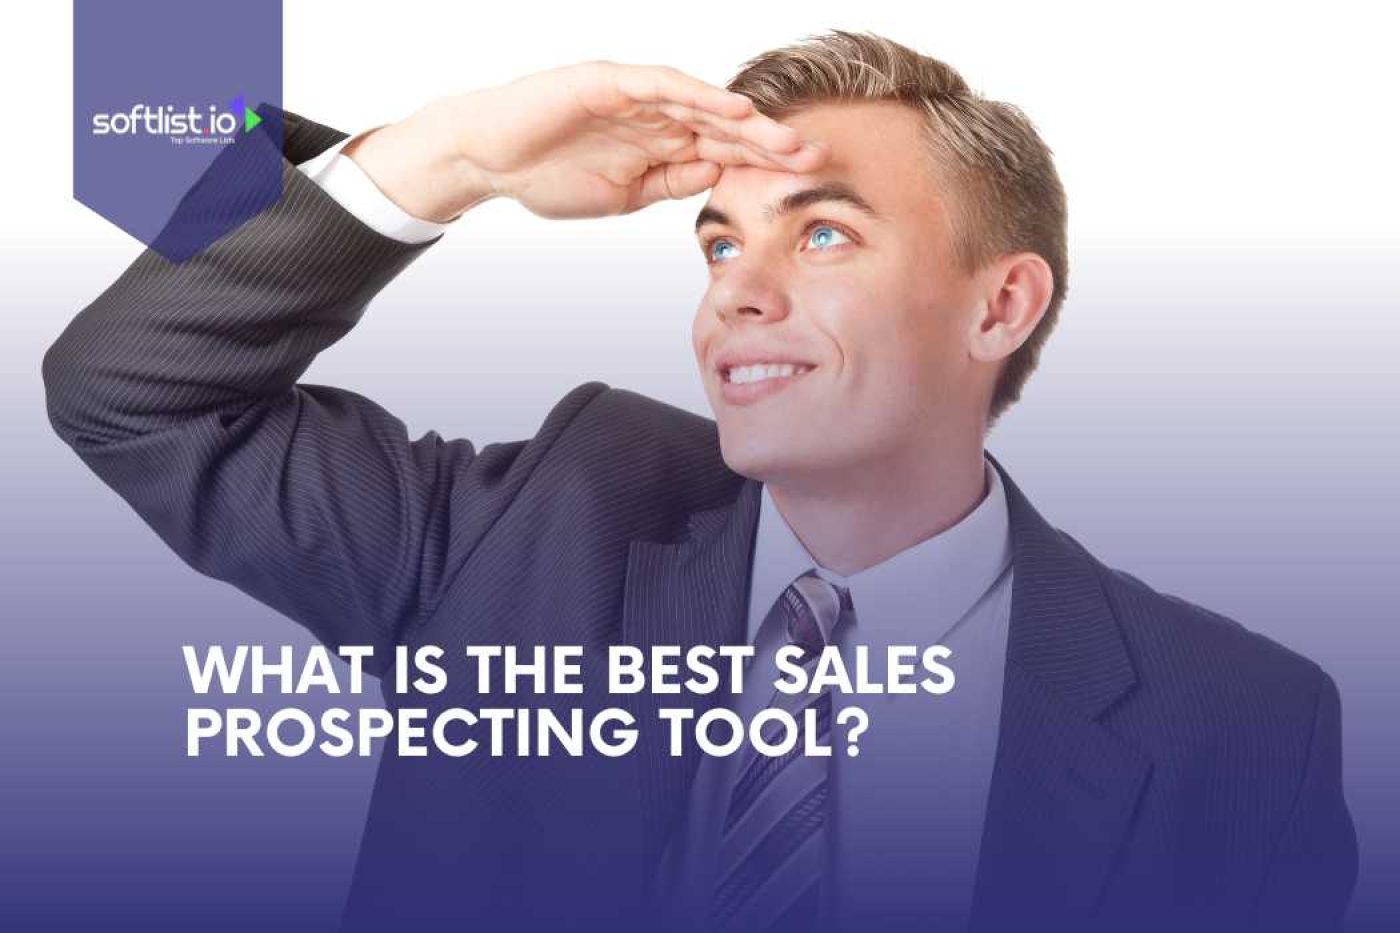 What Is the Best Sales Prospecting Tool